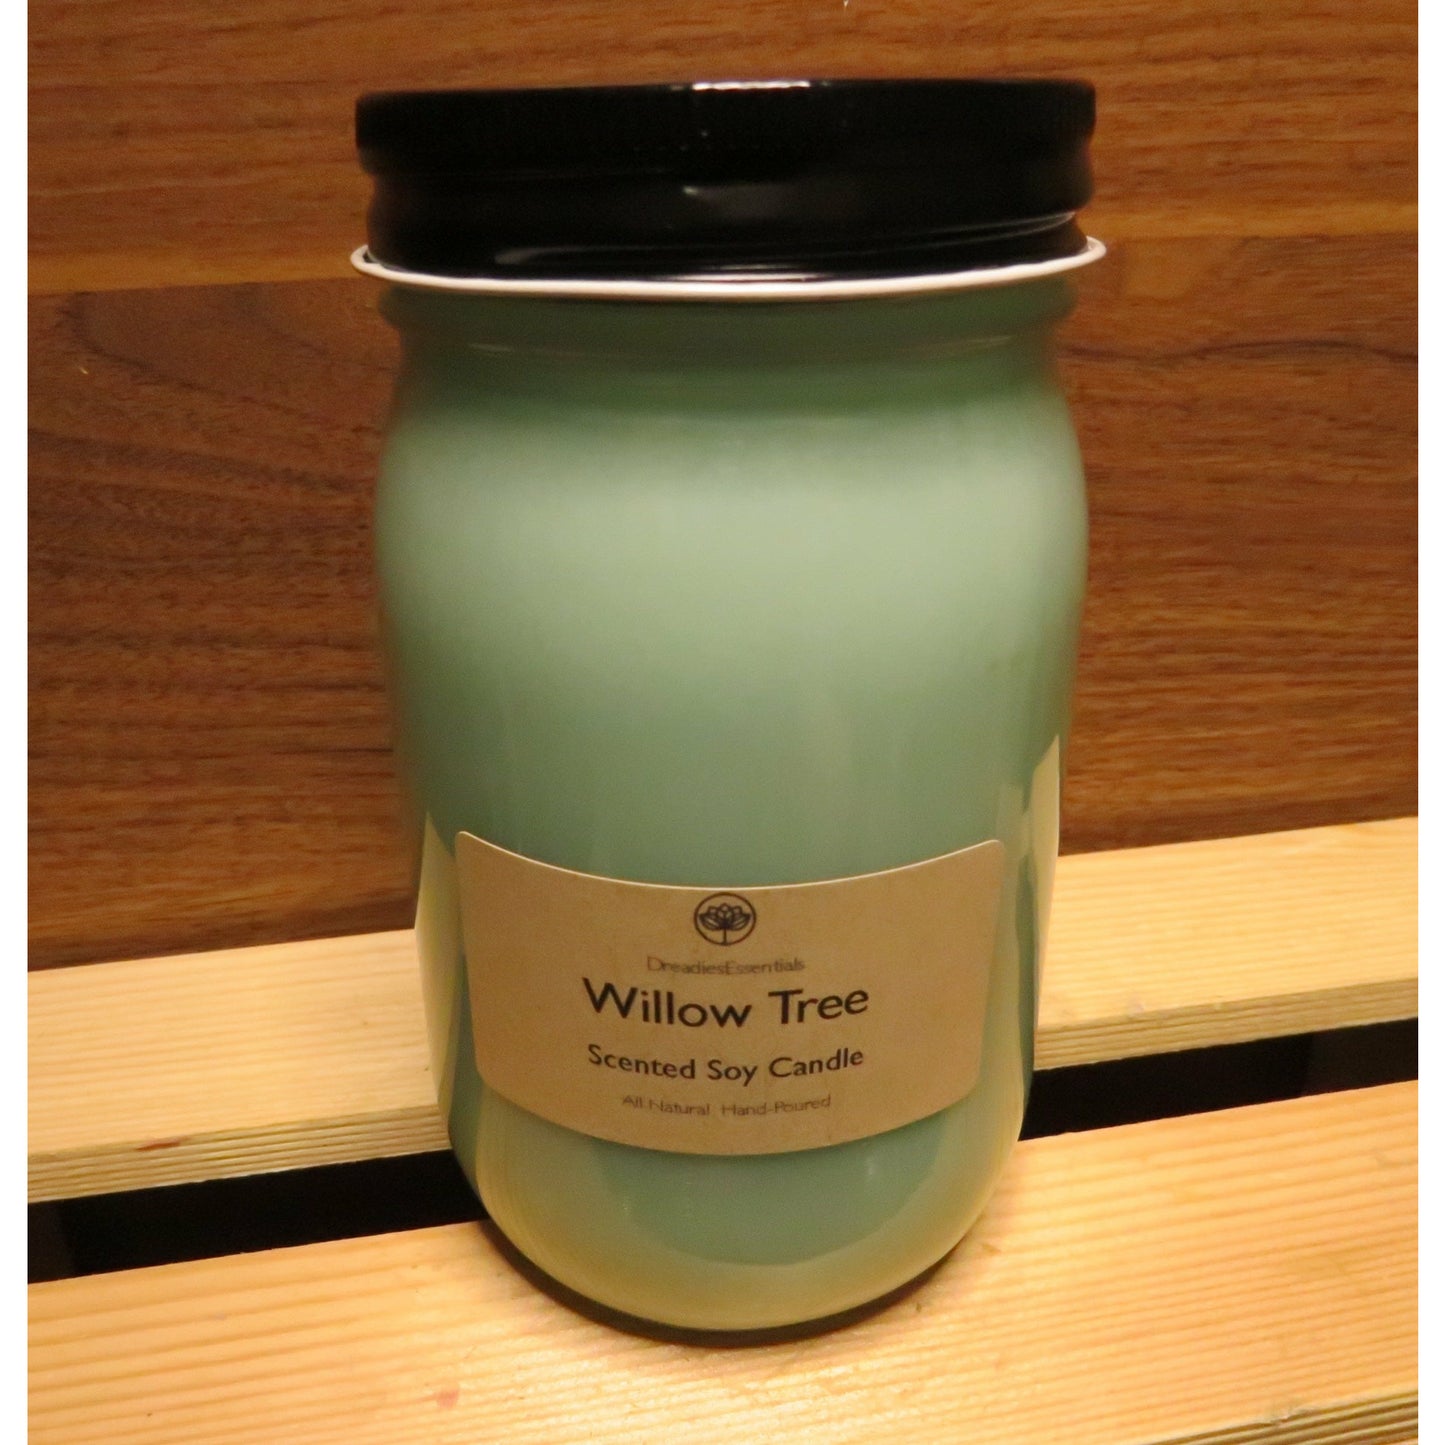 Willow Tree Scented Soy Candle